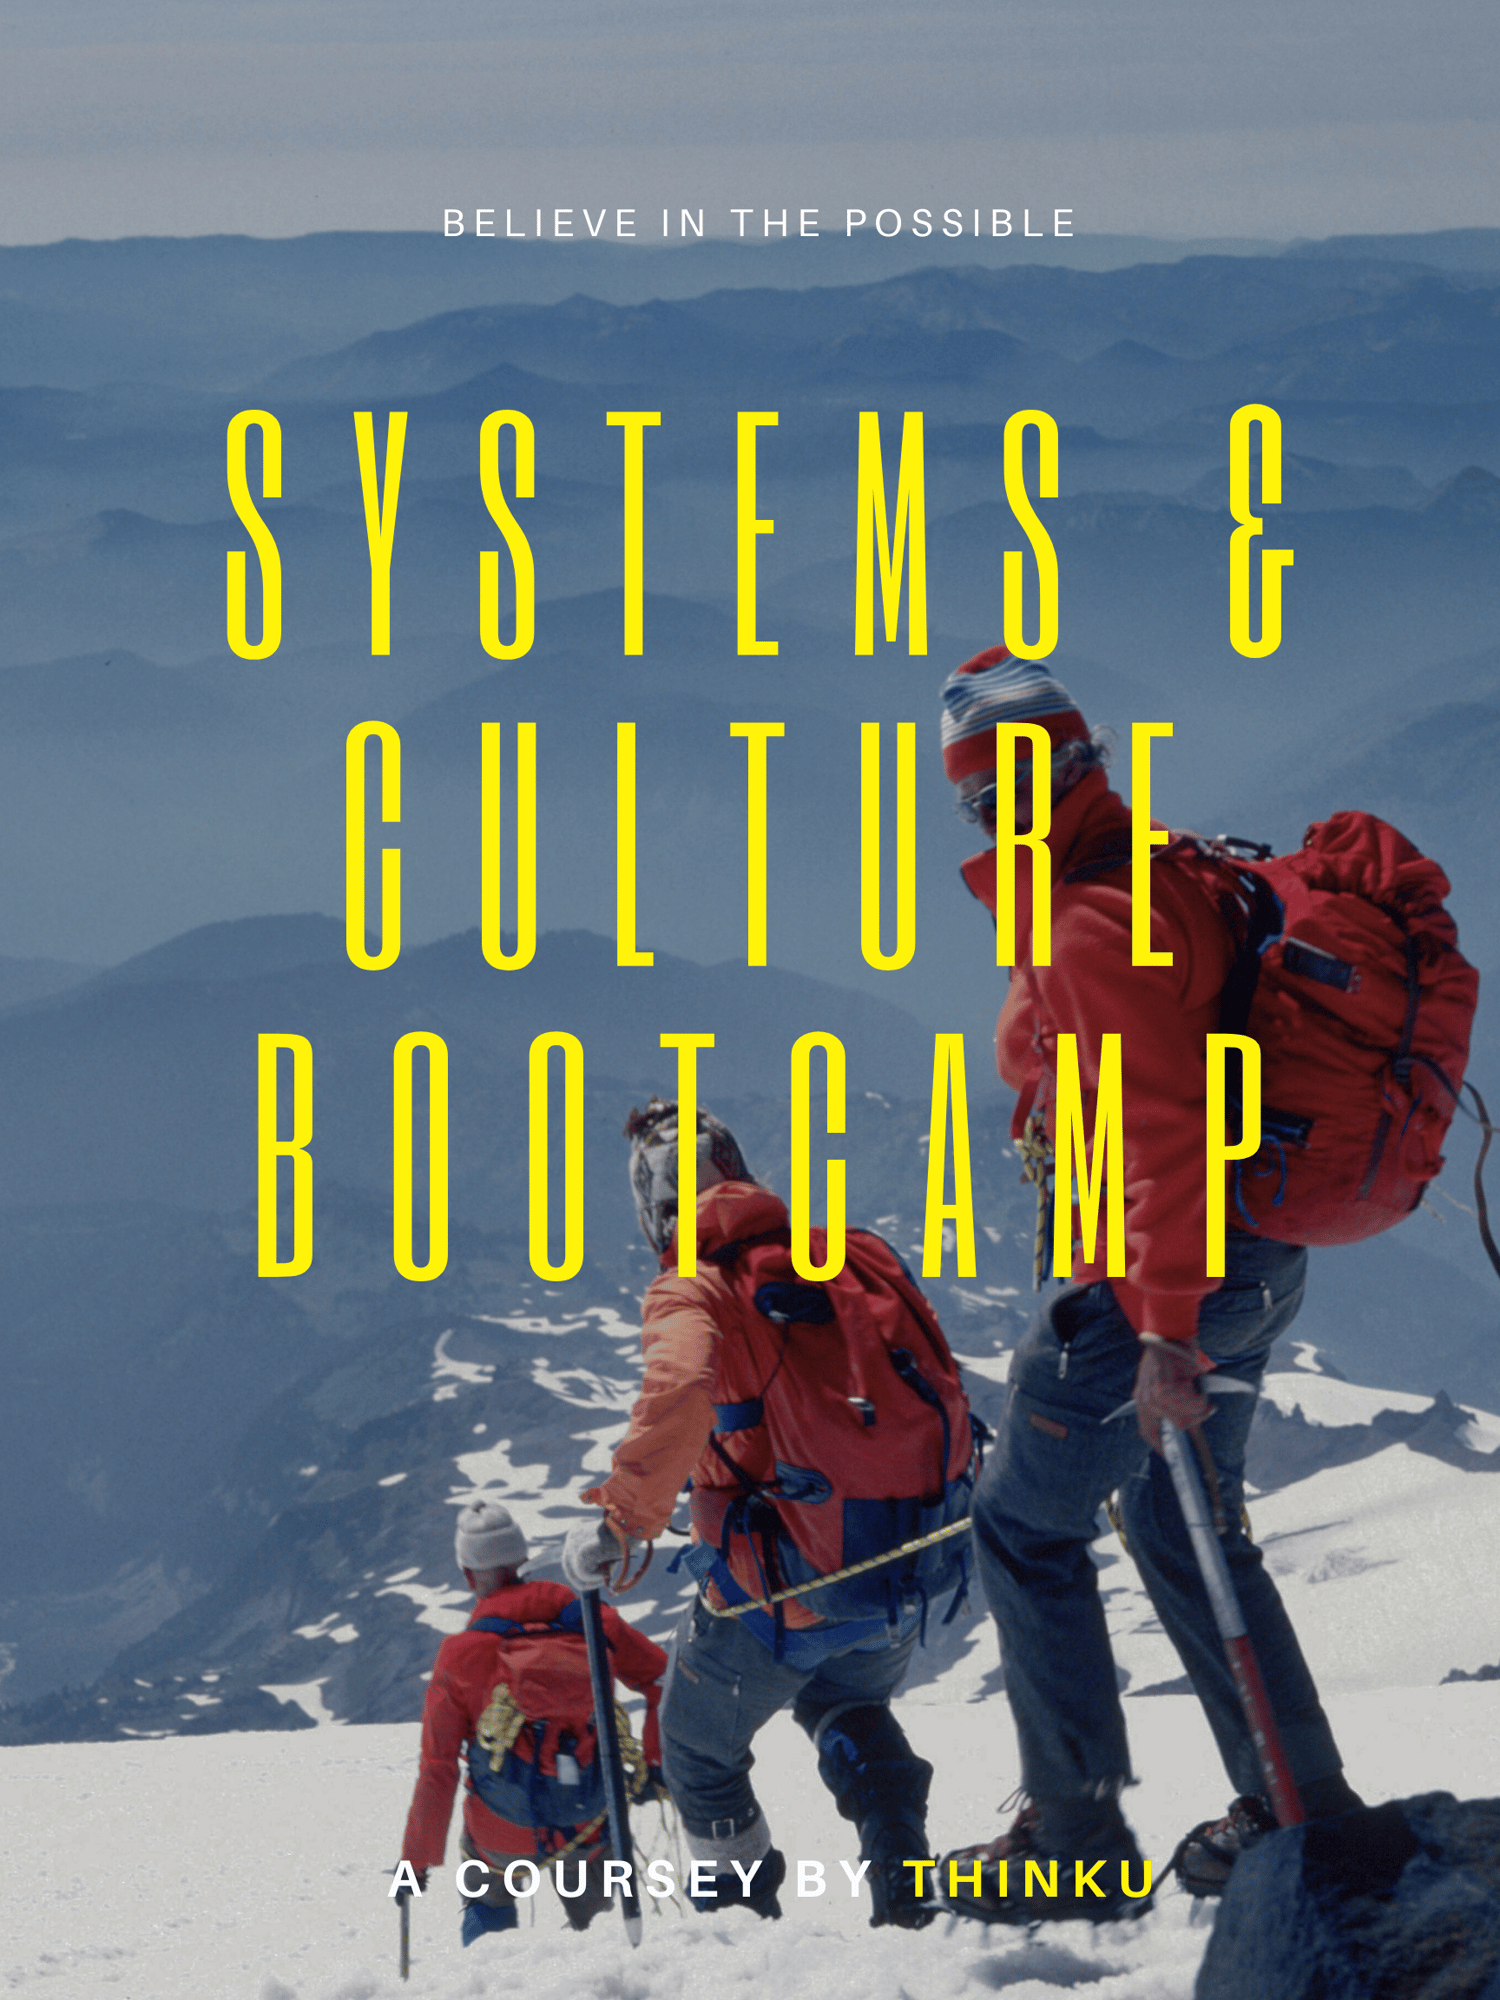 Systems & CULTURE BOOTCAMP